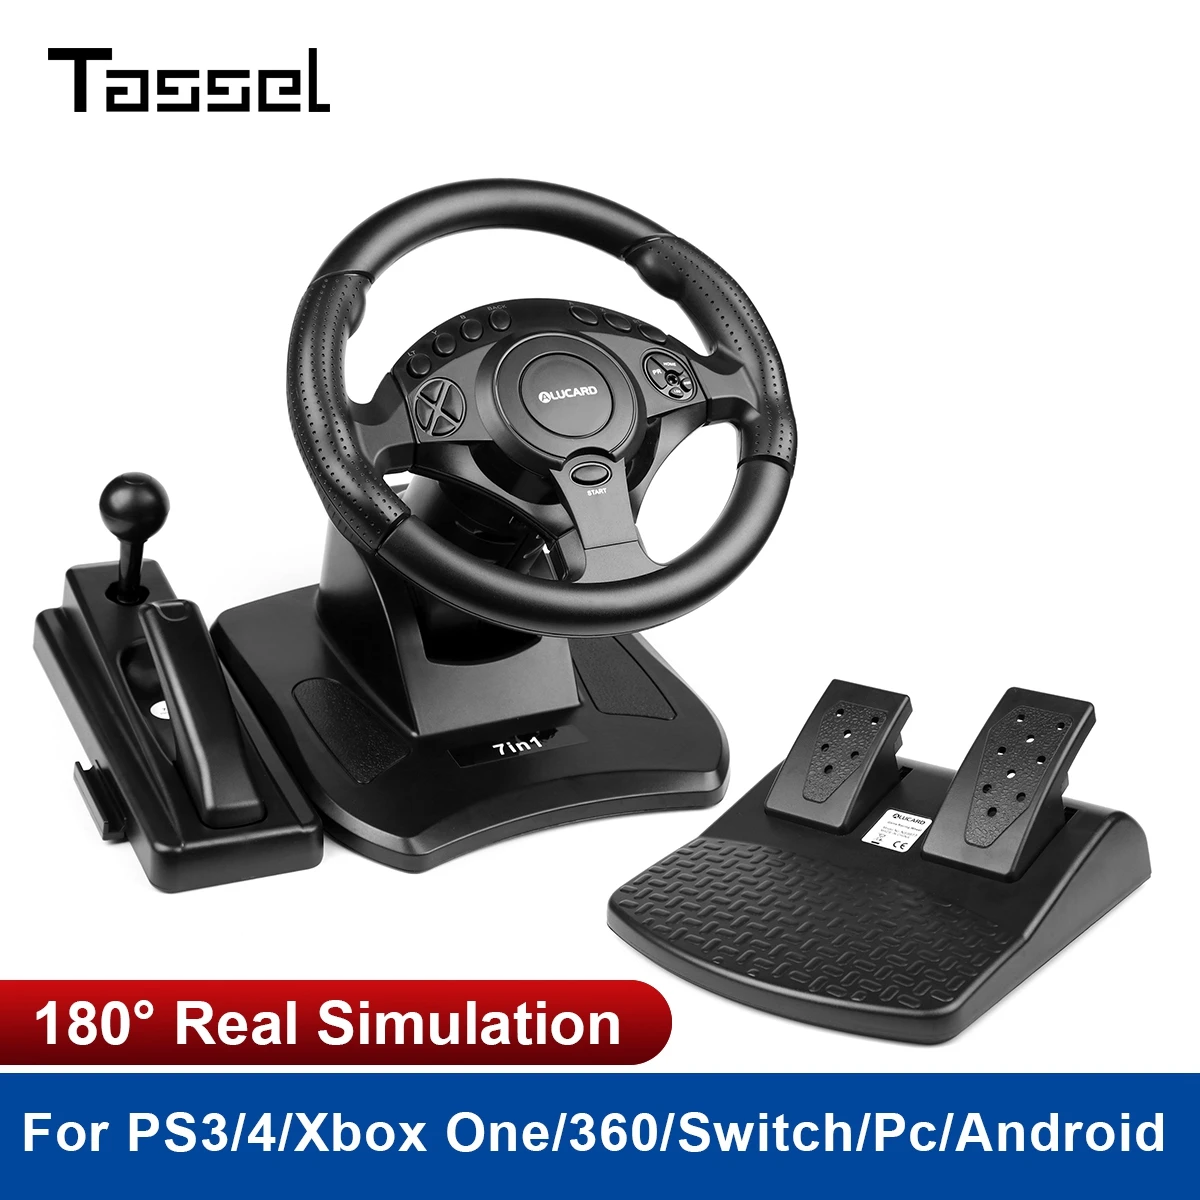 

Game Racing Whee 180° Rotation For PS4/PS3/XBOX 360/XBOX ONE/ANDROID/Switch/PC For DiRT 4 Game USB Dual Vibration Pedal Wheels